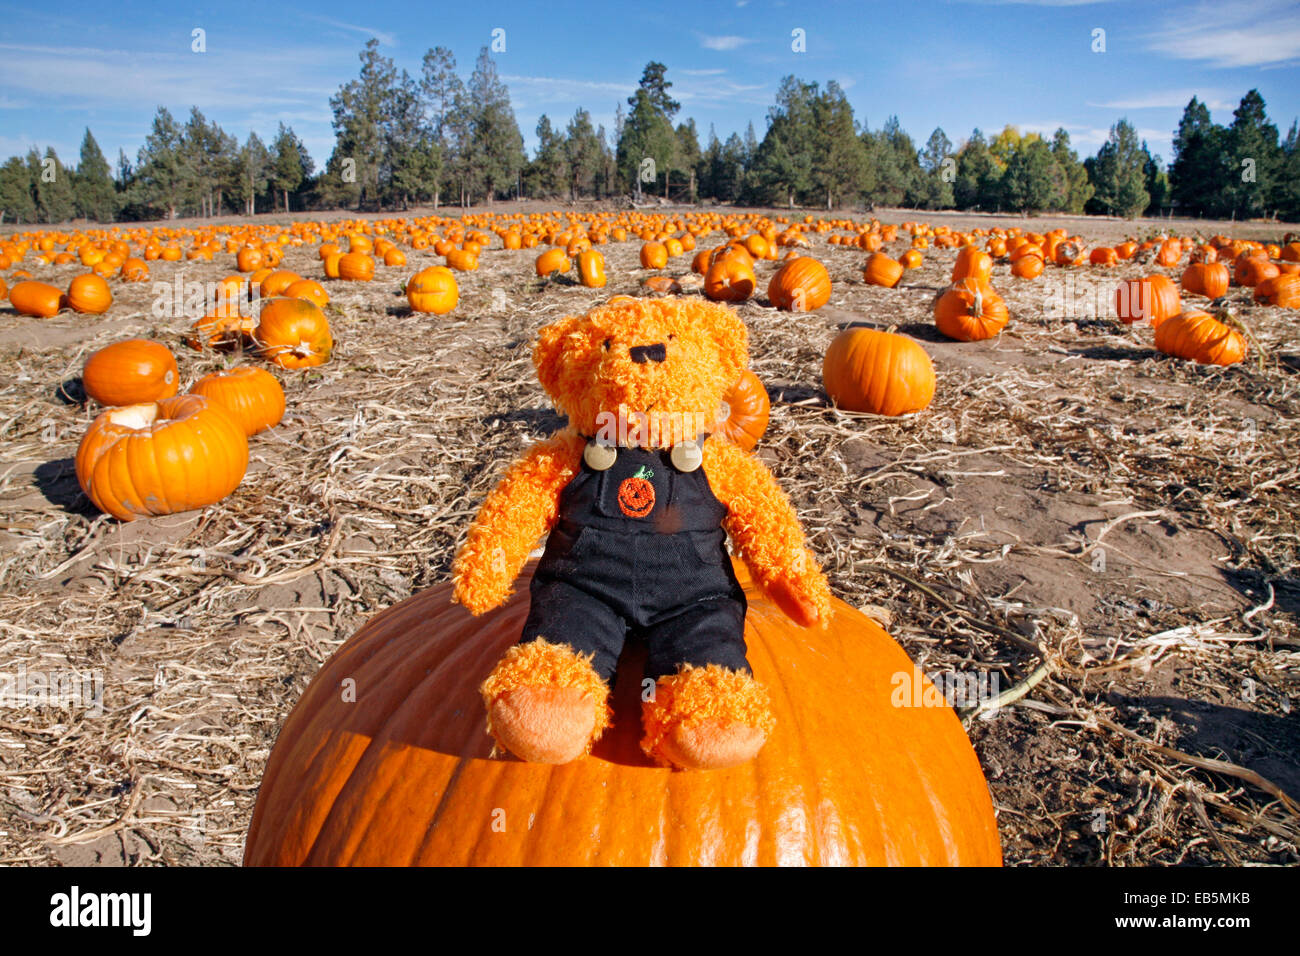 A teddy bear dressed in a halloween costume on a pumpkin in a pumpkin patch Stock Photo